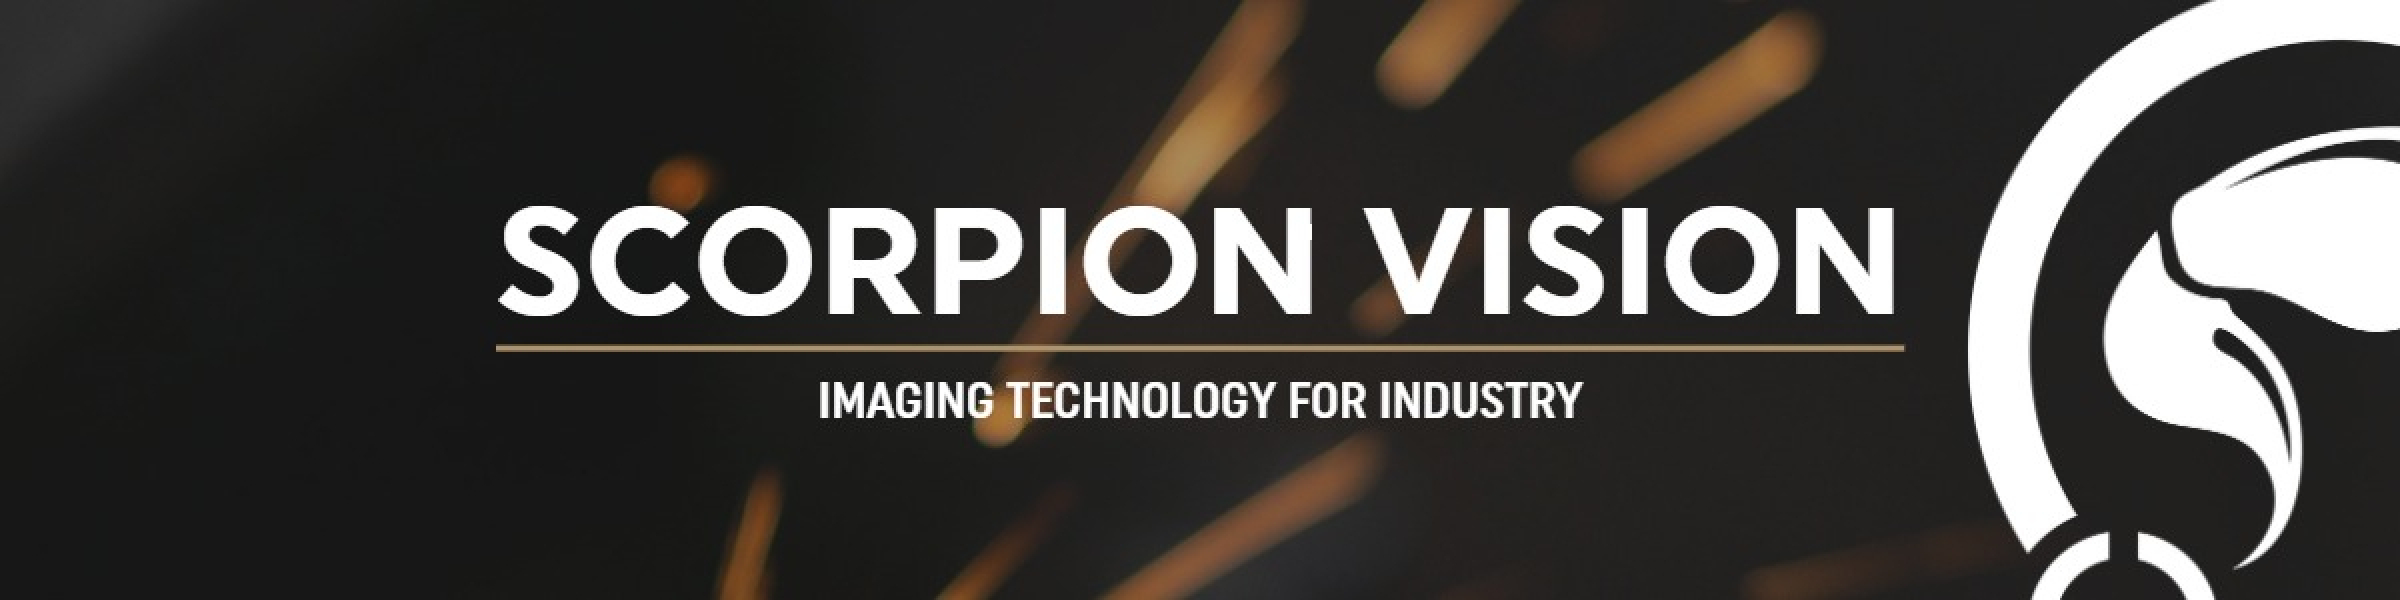 Scorpion Vision Company banner. A graphic of a scorpion tail stinger